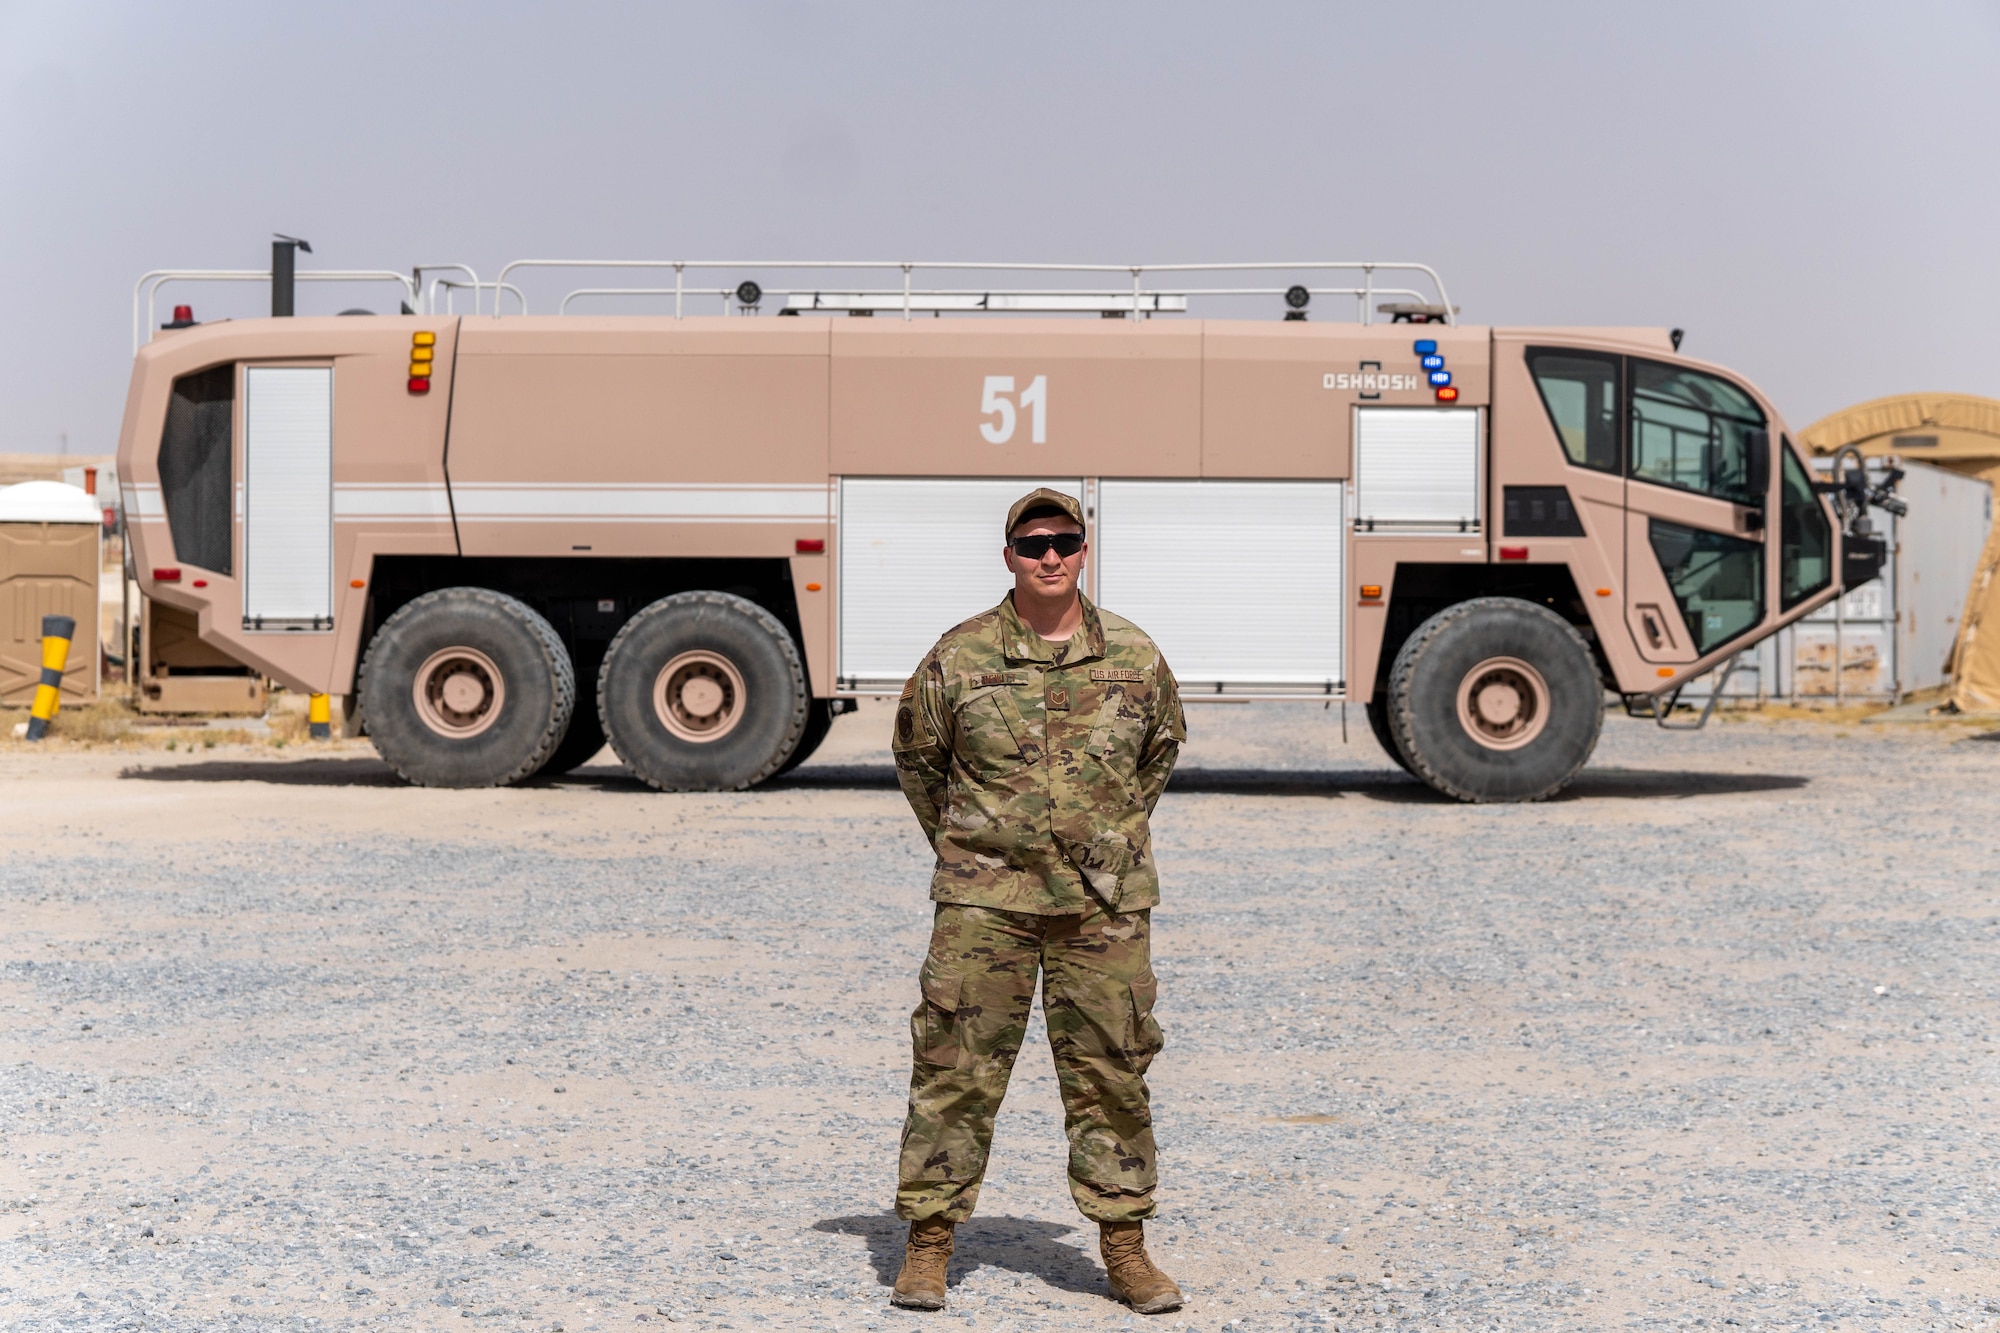 U.S. Air Force Technical Sgt. Matthew Dewitt, 386th Logistics Readiness Squadron NCOIC of fire truck and material handling, stands in front of an aircraft rescue and firefighting apparatus (ARFF) at Ali Al Salem Air Base, Kuwait. Dewitt secured the fire protection capabilities necessary to protect U.S. and partner nation forces by dedicating 252 hours on and off duty to repair the ARFF after it was rendered inoperable for 514 days.